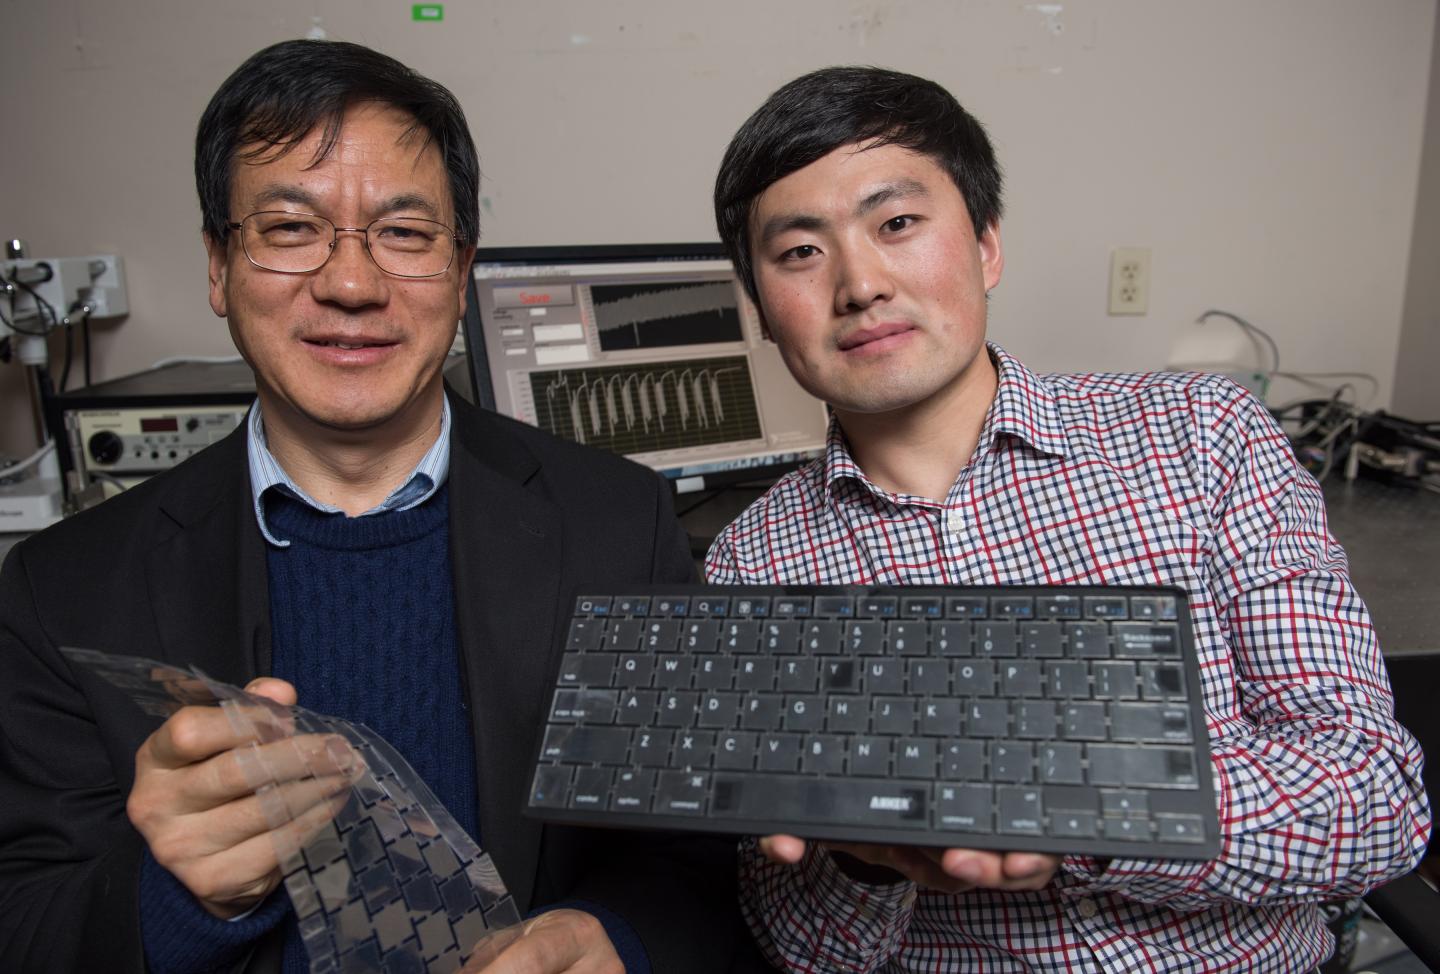 Researchers with Intelligent Keyboard